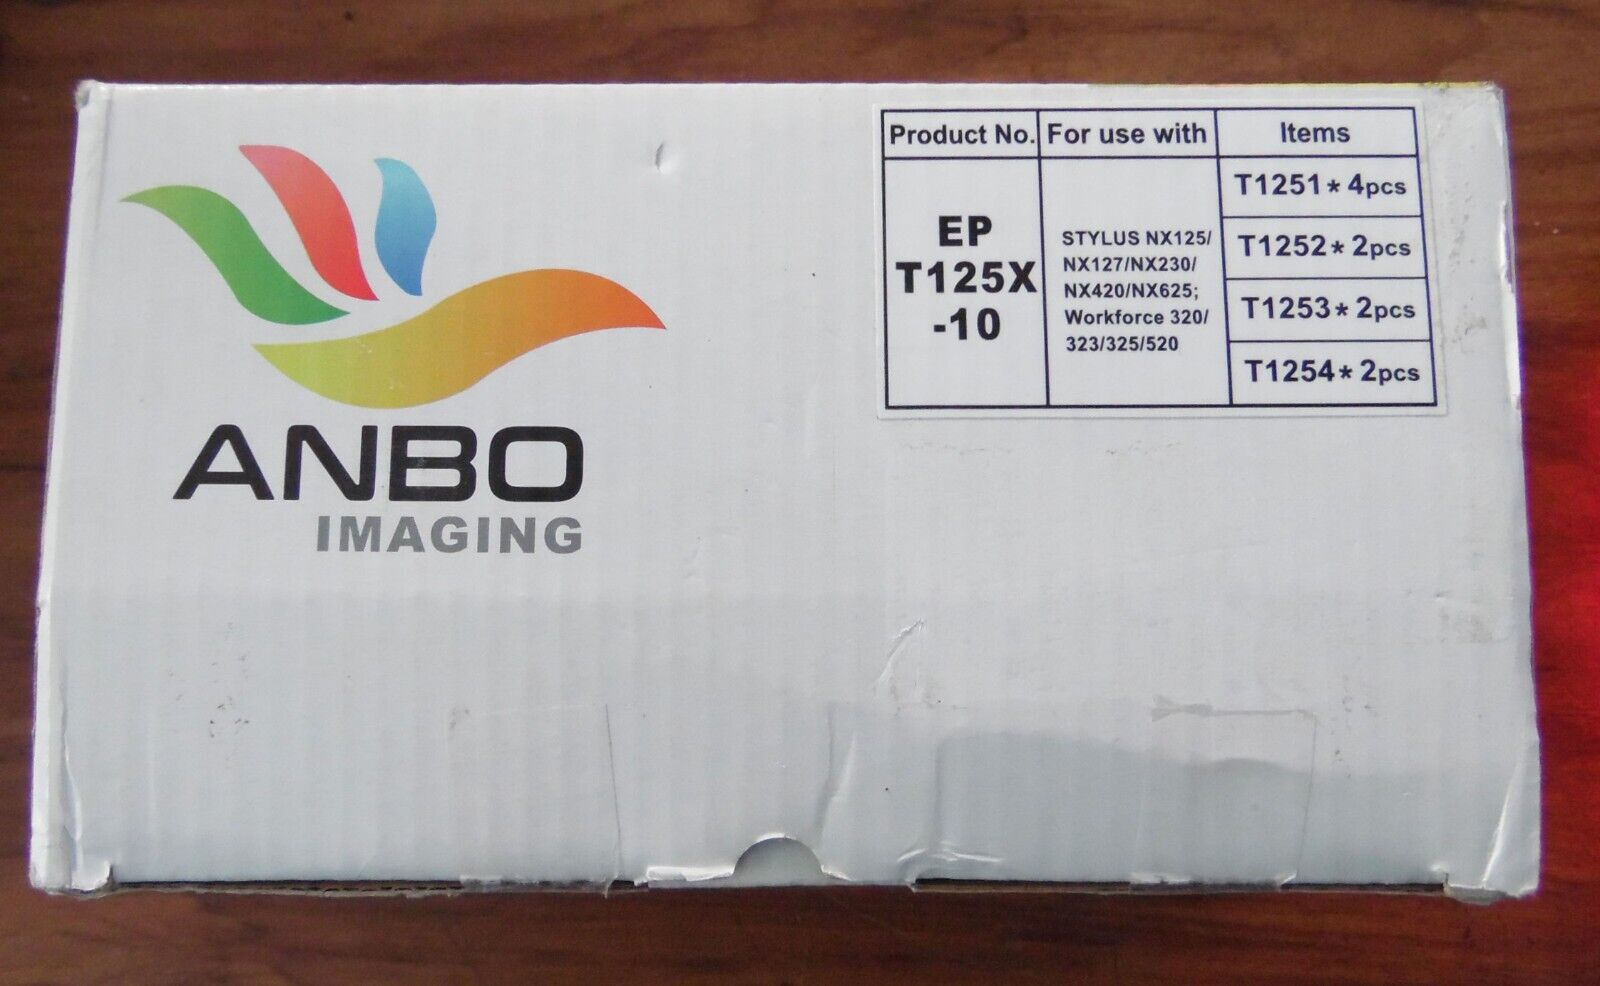 New ANBO IMAGING EPT125X-10 pack Ink Cartridges for Epson T125 Free US Shipping